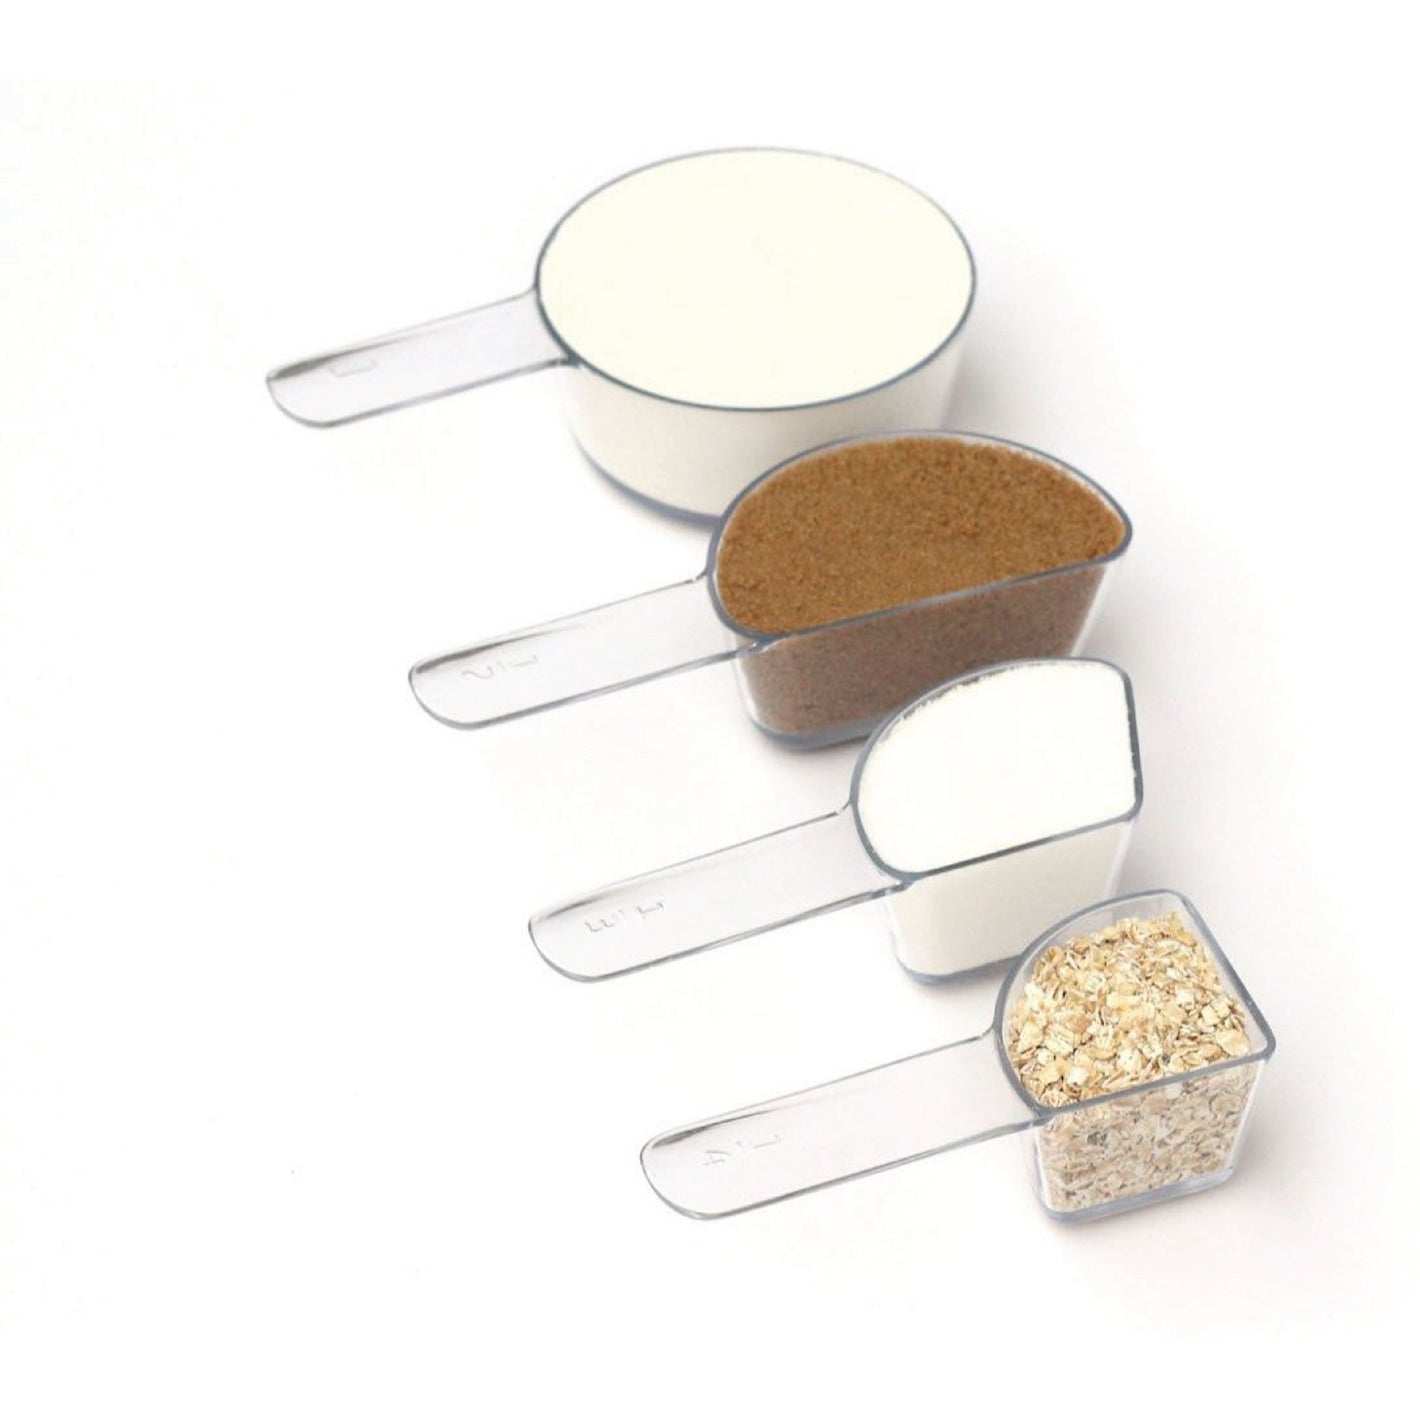 Photo of visual measuring cups arranged in a line and filled with ingredients ranging from flour to brown sugar to oatmeal